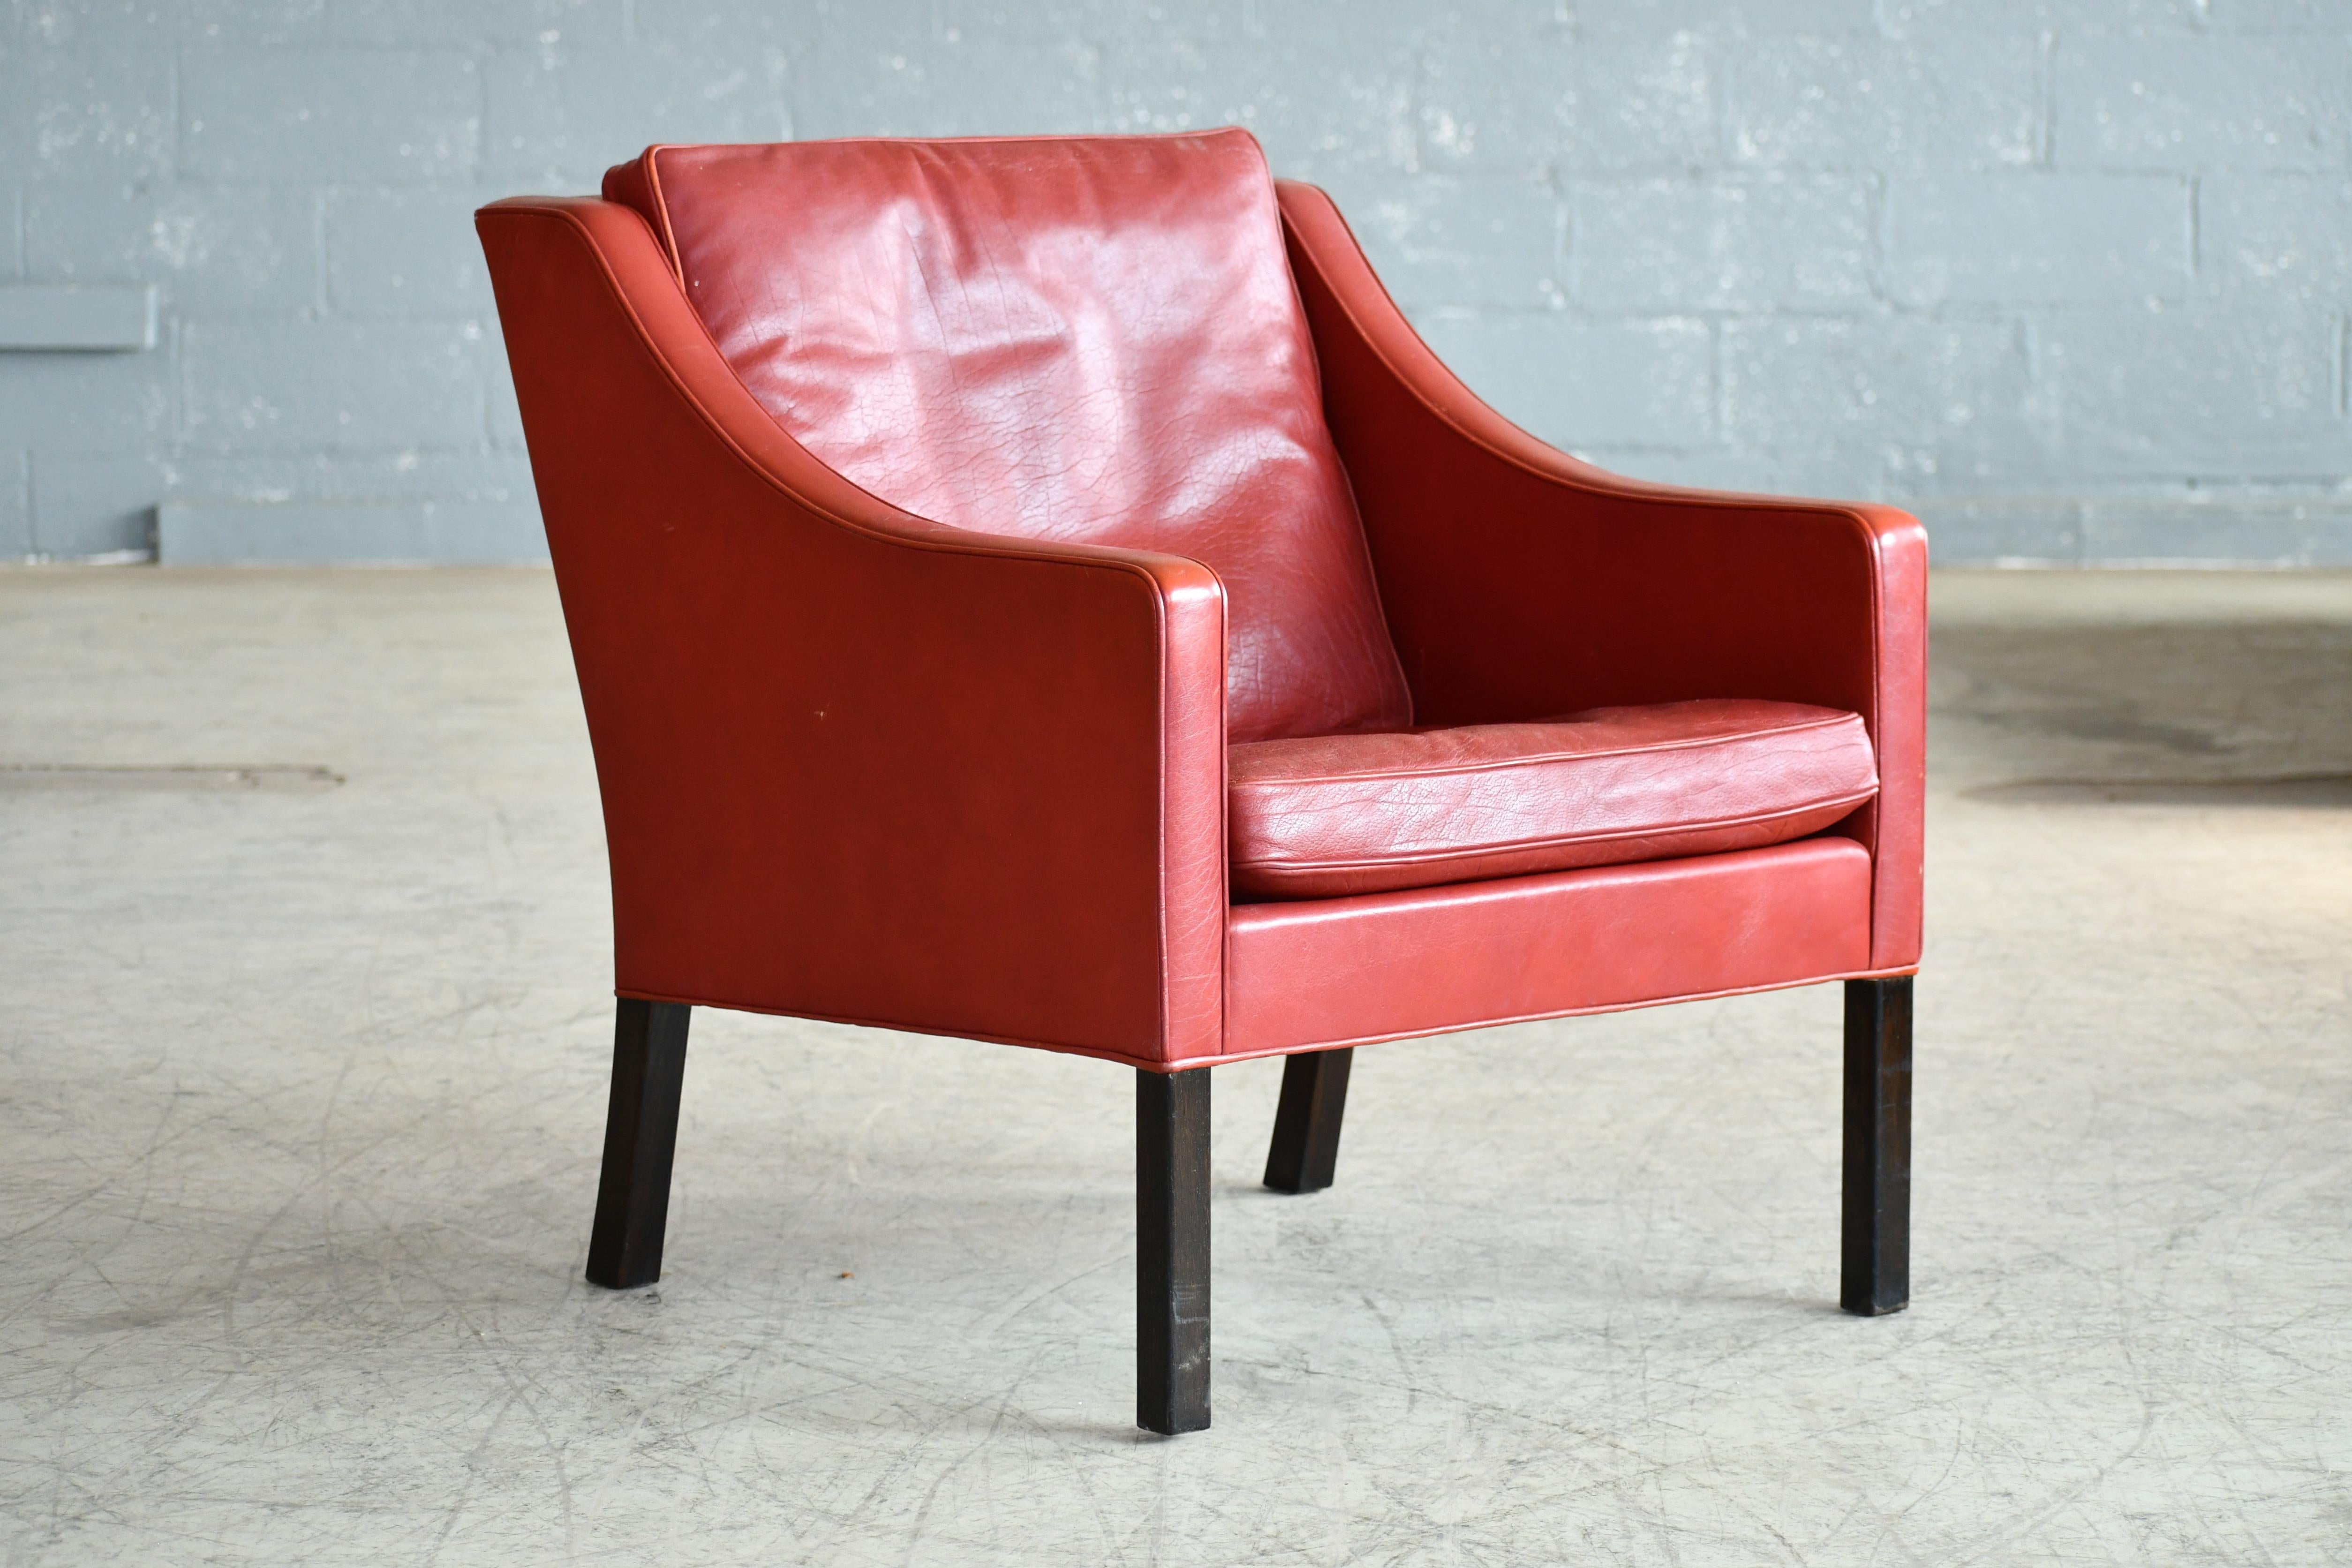 Perennial Børge Mogensen designed lounge chair model 2421 for Fredericia. One of the most elegant Classic midcentury Danish lounge chairs ever made of a design that will just never go out of style. Supple red colored leather with down-filled